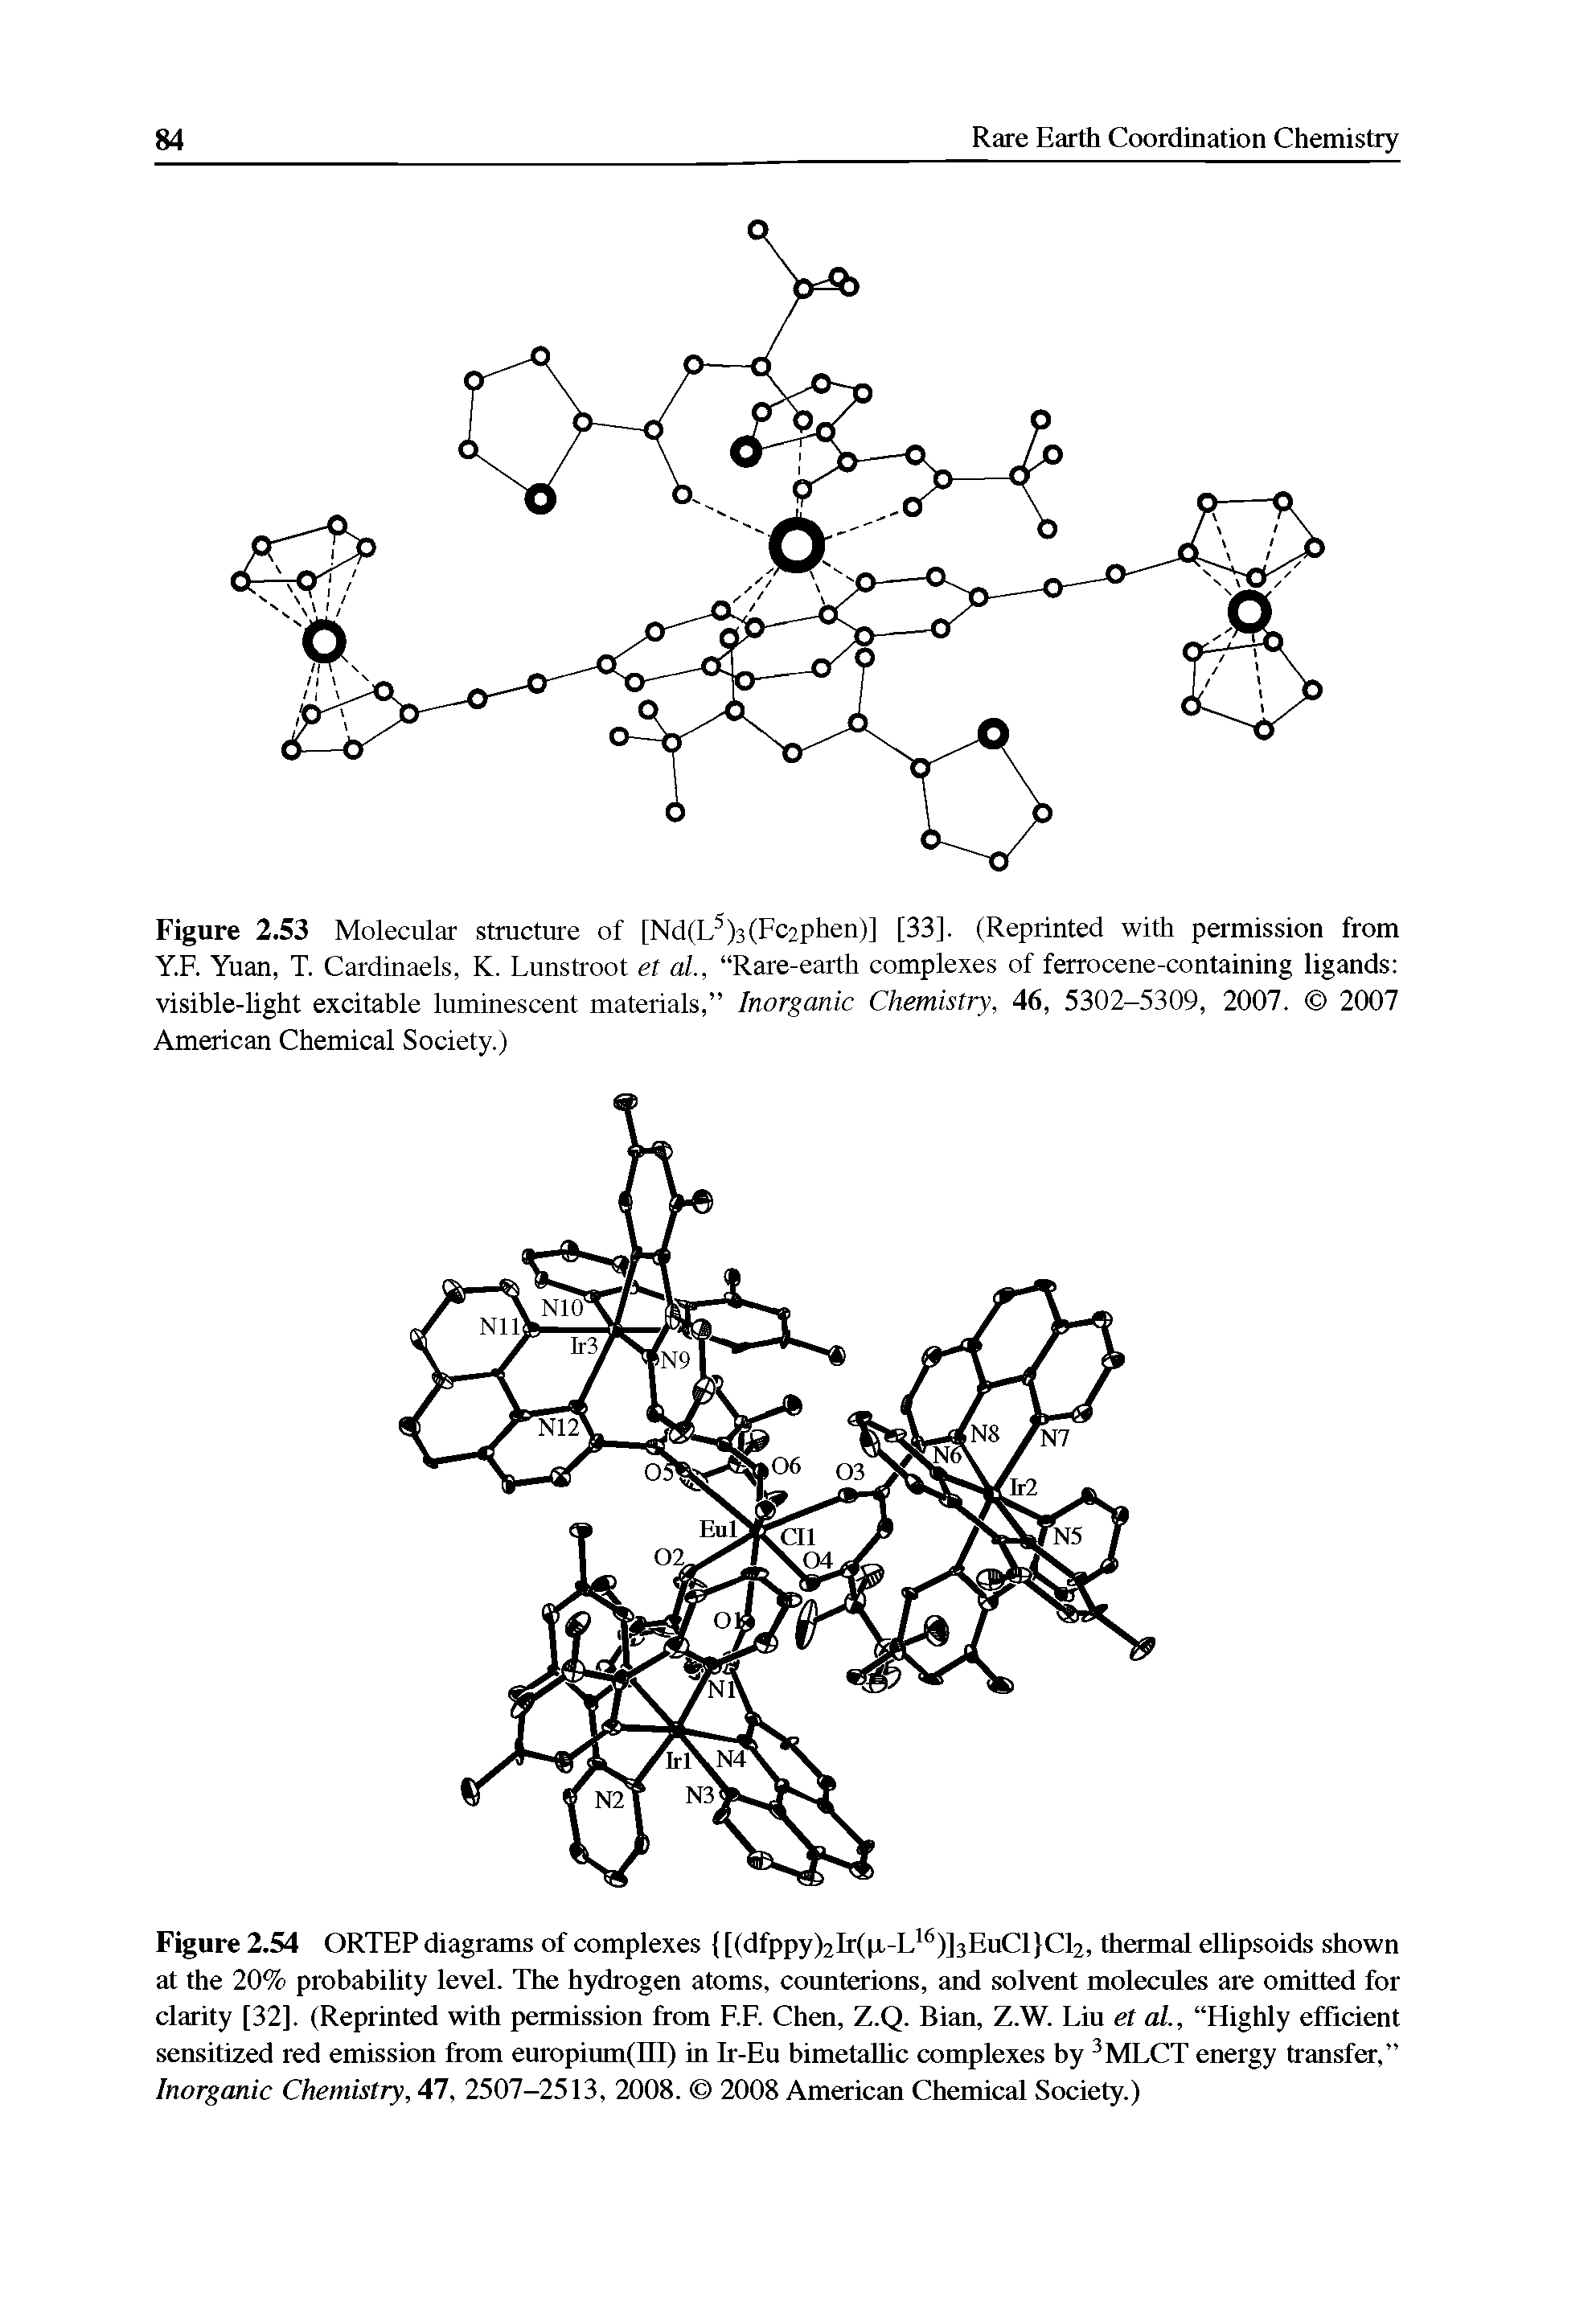 Figure 2.54 ORTEP diagrams of complexes [(dfppy)2lr(iJL-L )]3EuCl Cl2, thermal ellipsoids shown at the 20% probability level. The hydrogen atoms, counterions, and solvent molecules are omitted for clarity [32]. (Reprinted with permission from F.F. Chen, Z.Q. Bian, Z.W. Liu et al, Flighly efficient sensitized red emission from europium(III) in Ir-Eu bimetaUic complexes by MLCT energy transfer, Inorganic Chemistry, 47, 2507-2513, 2008. 2008 American Chemical Society.)...